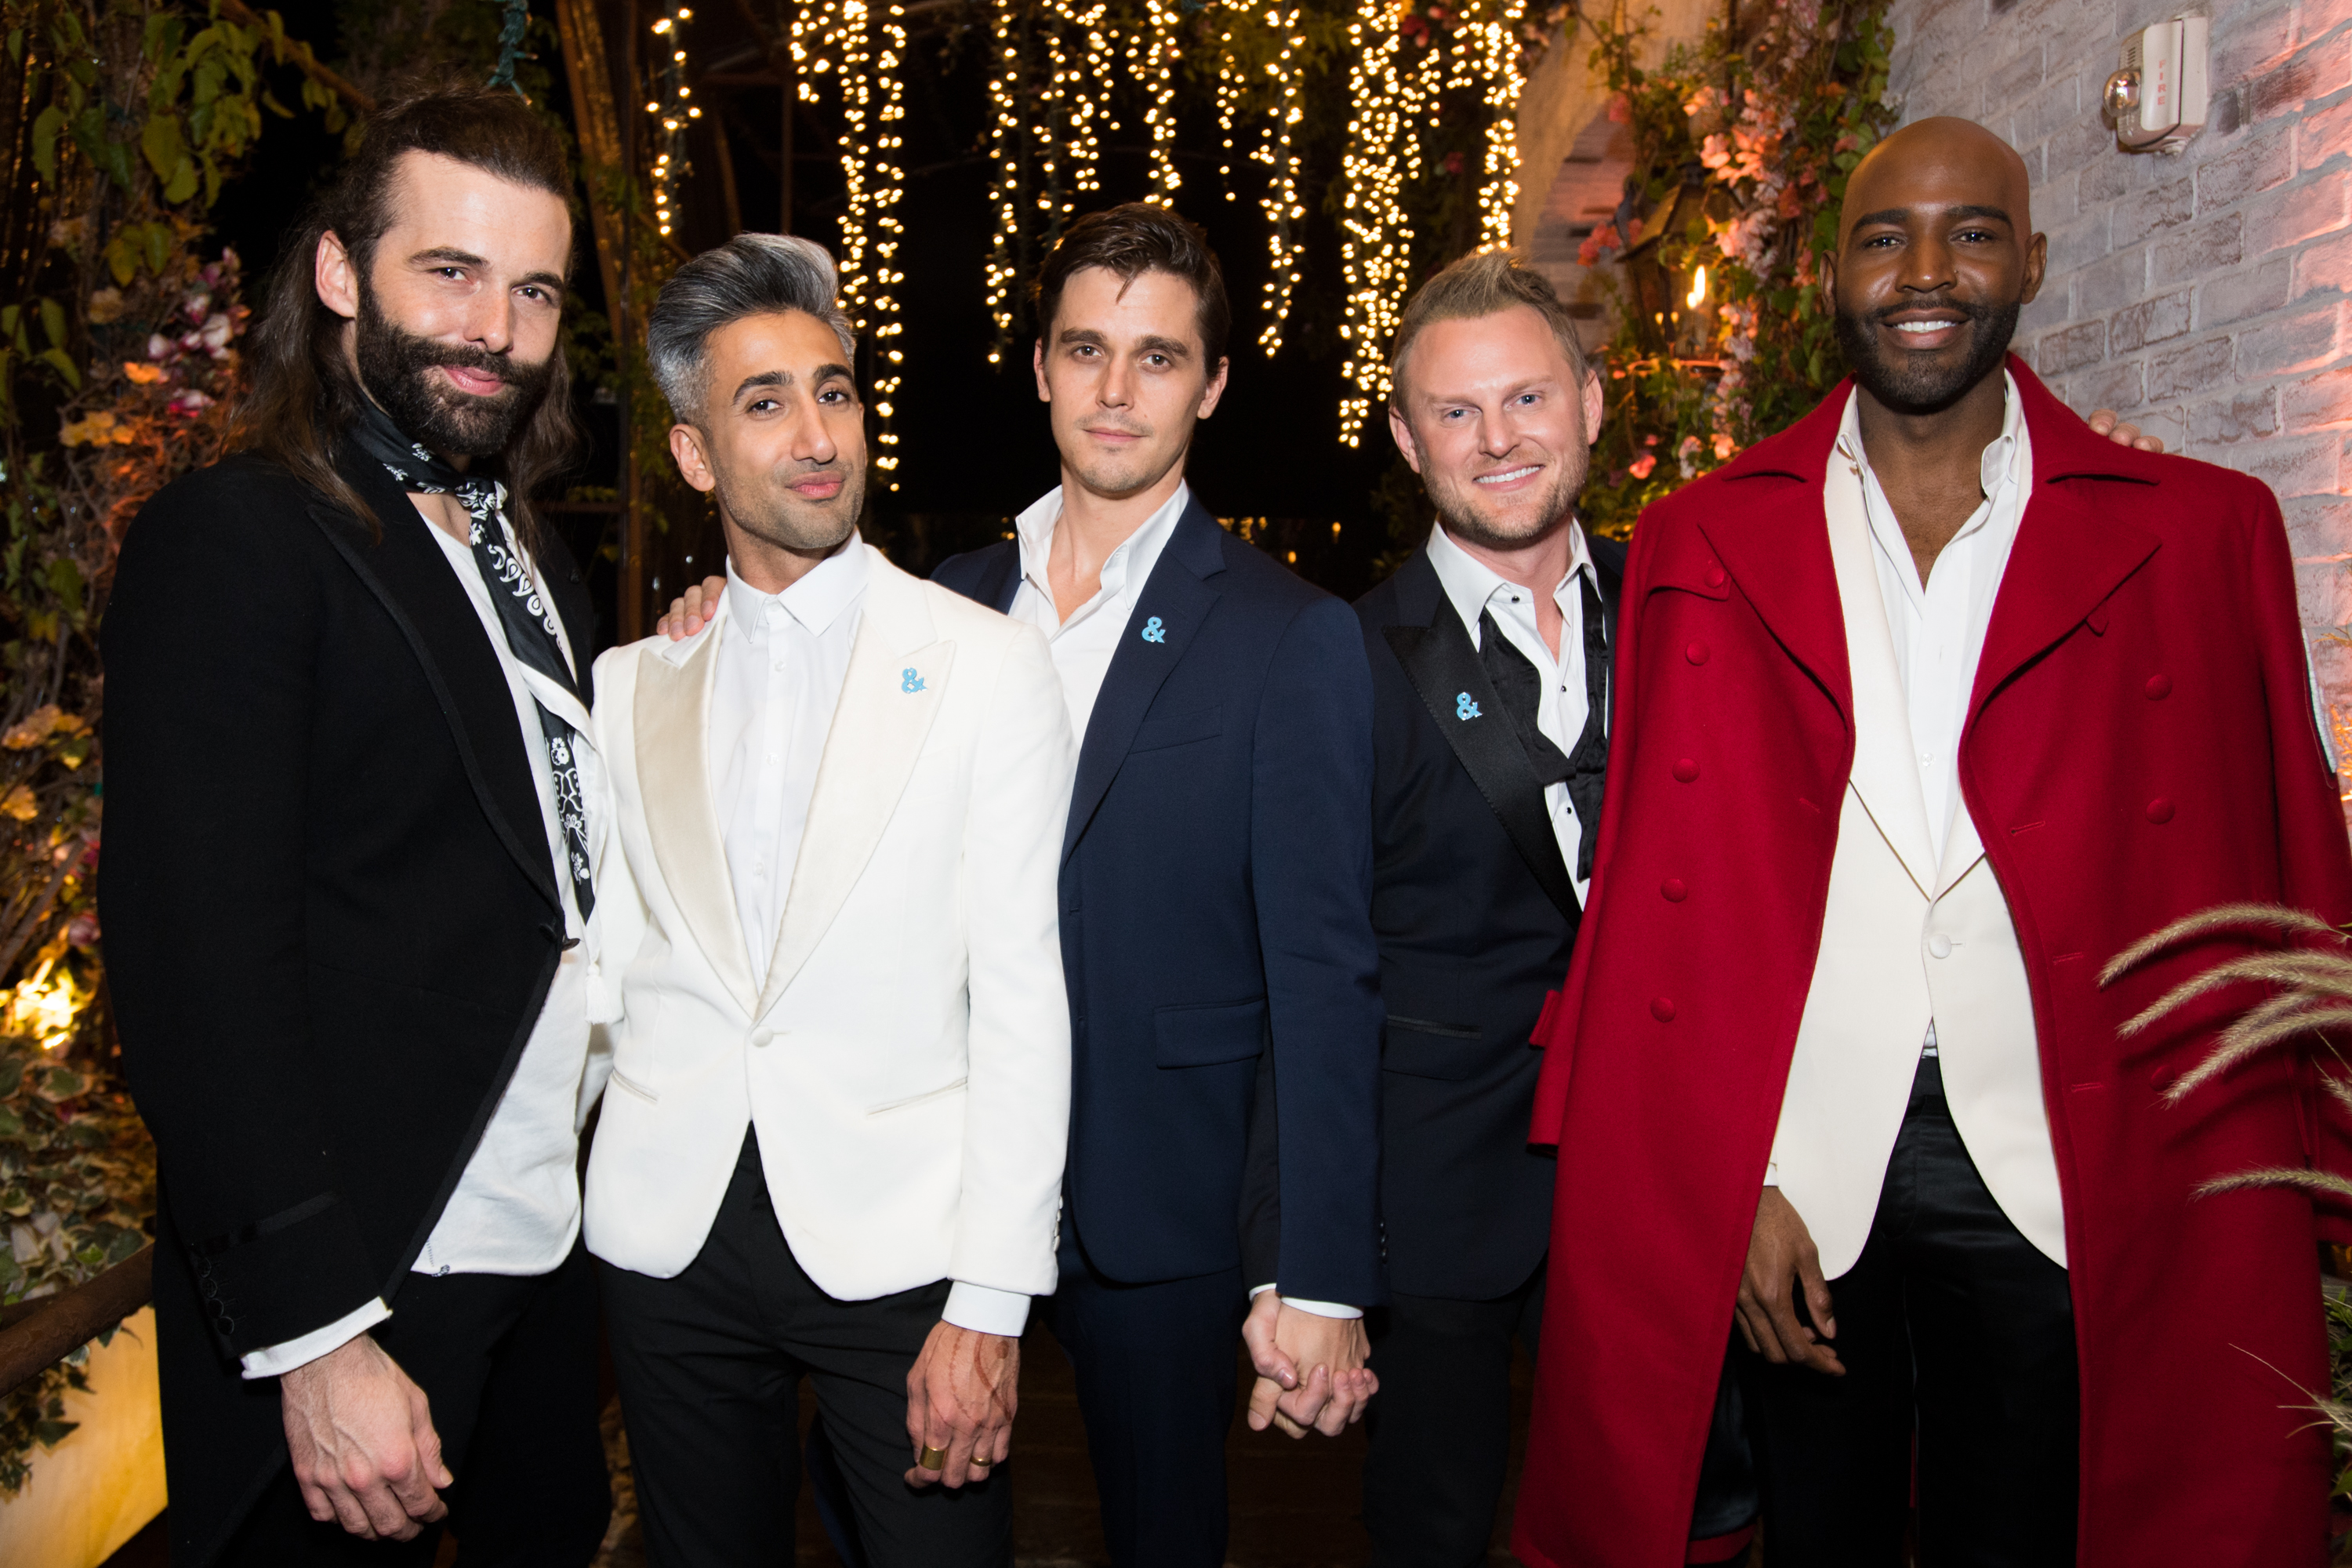 Premiere Of Netflix's 'Queer Eye' Season 1 - After Party